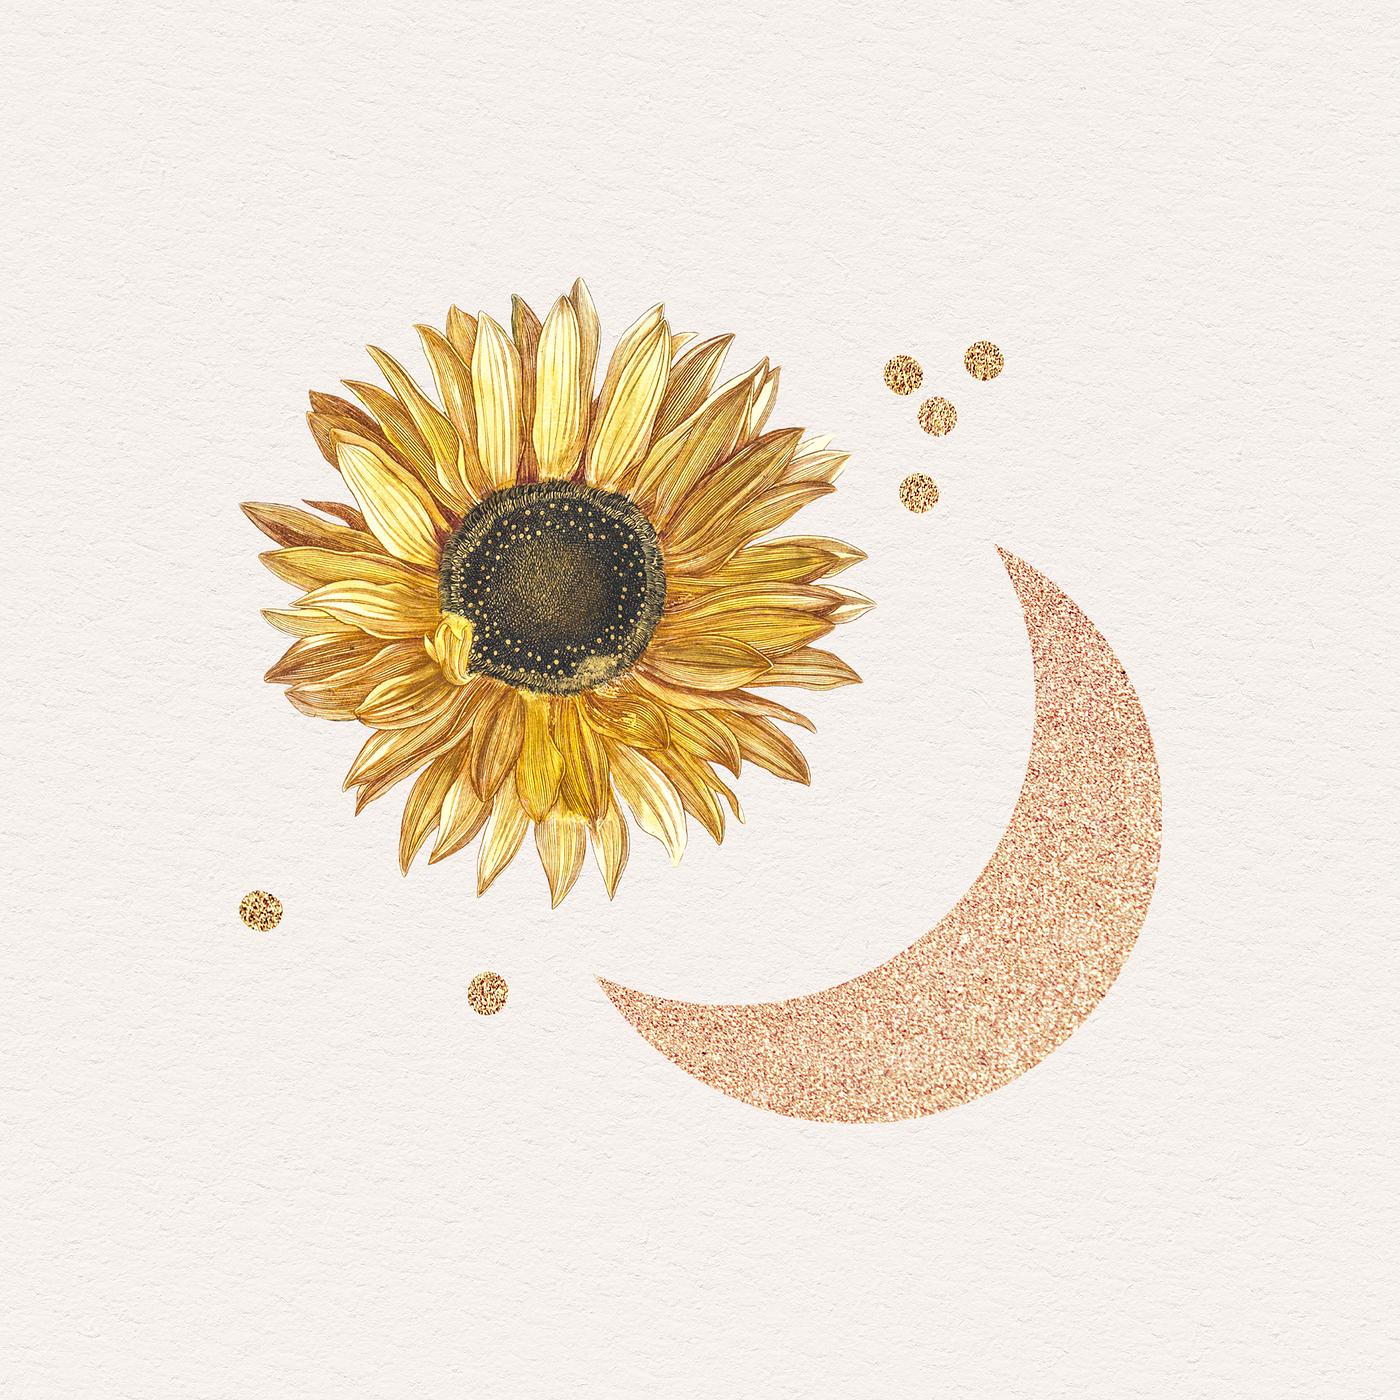 Sunflower and a moon sticker psd | Royalty free stock ...